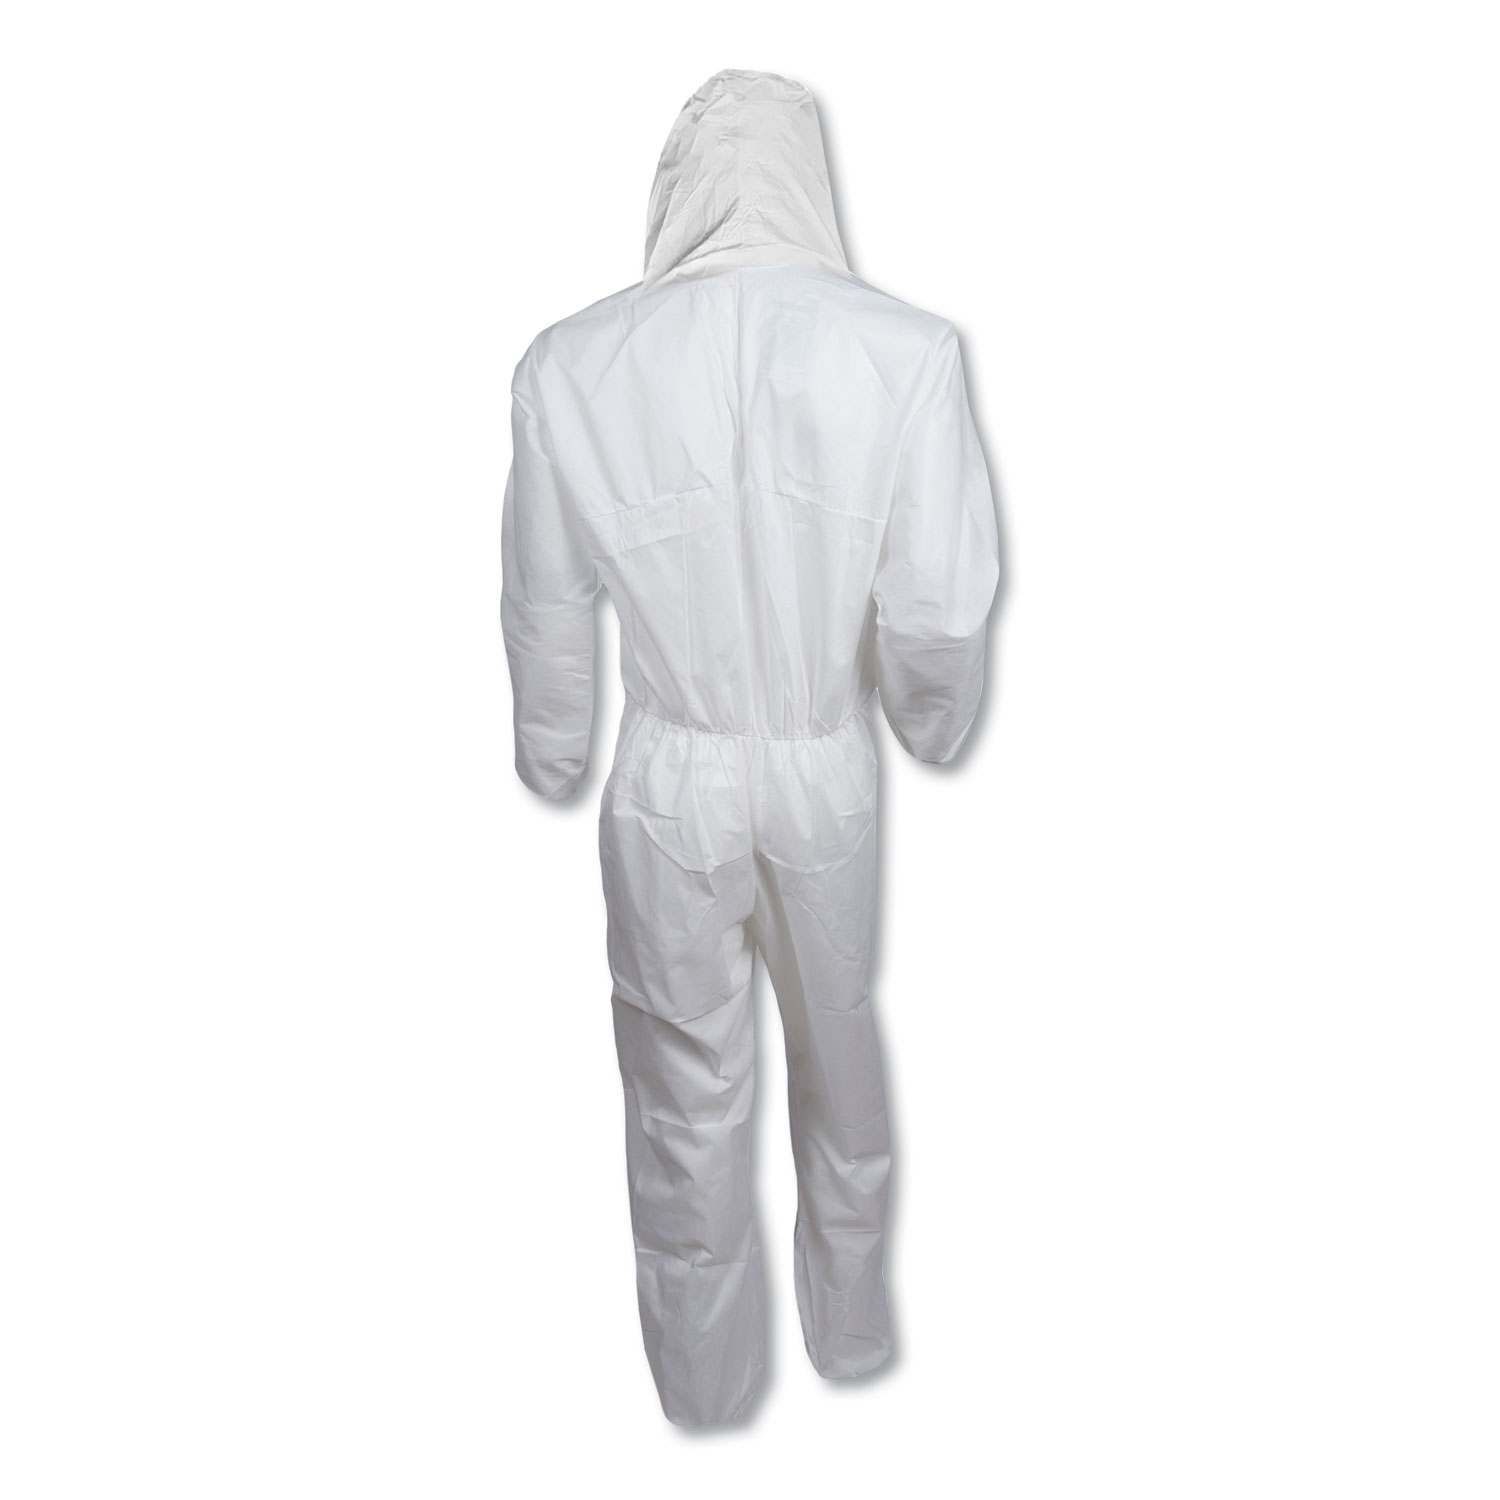 A30 Elastic Back and Cuff Hooded Coveralls, 4X-Large, White, 21/Carton